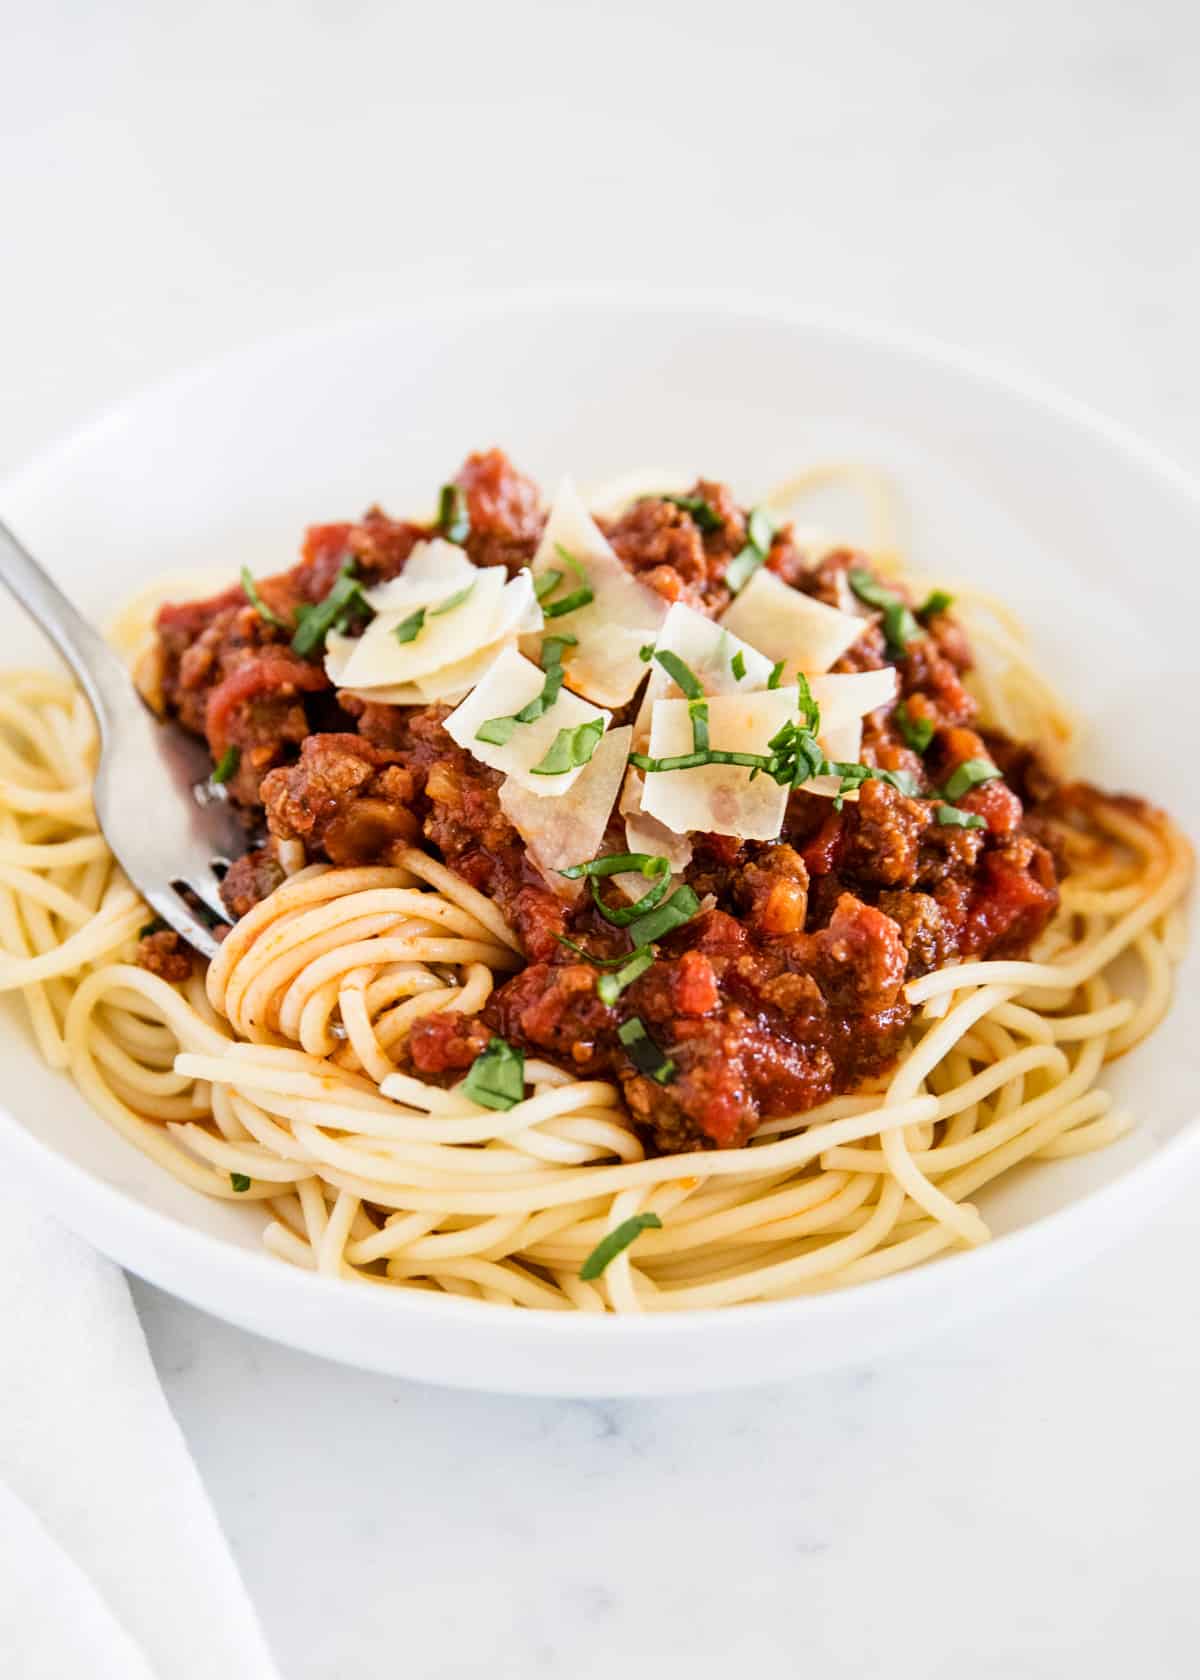 Spaghetti sauce and noodles on white plate.